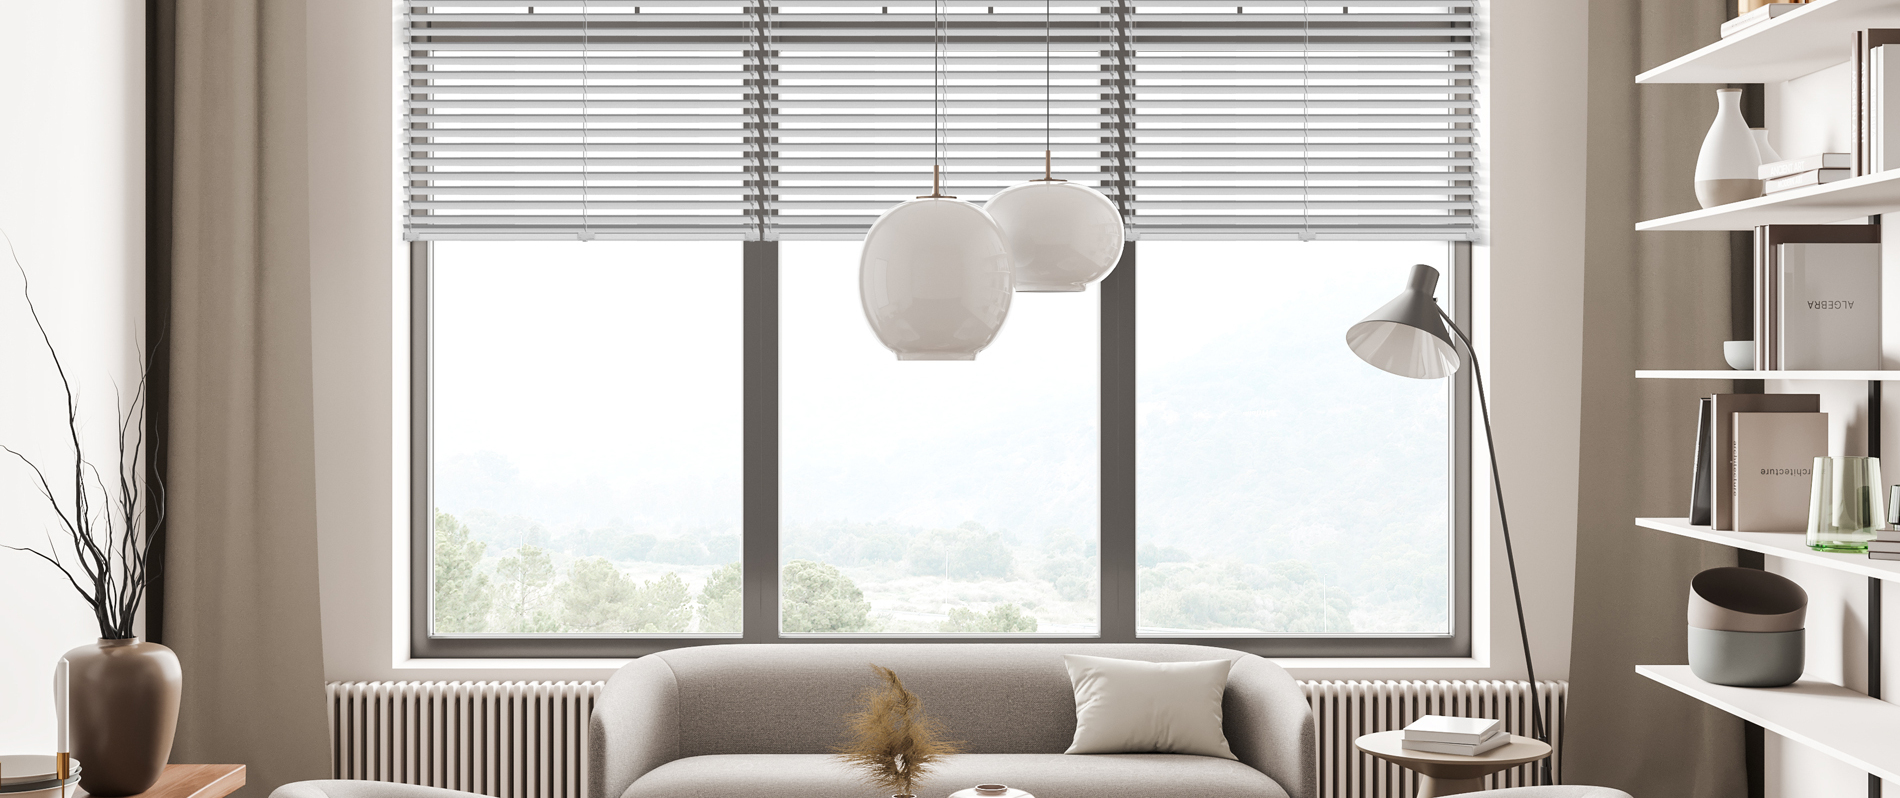 Factors to Consider When Choosing Blinds